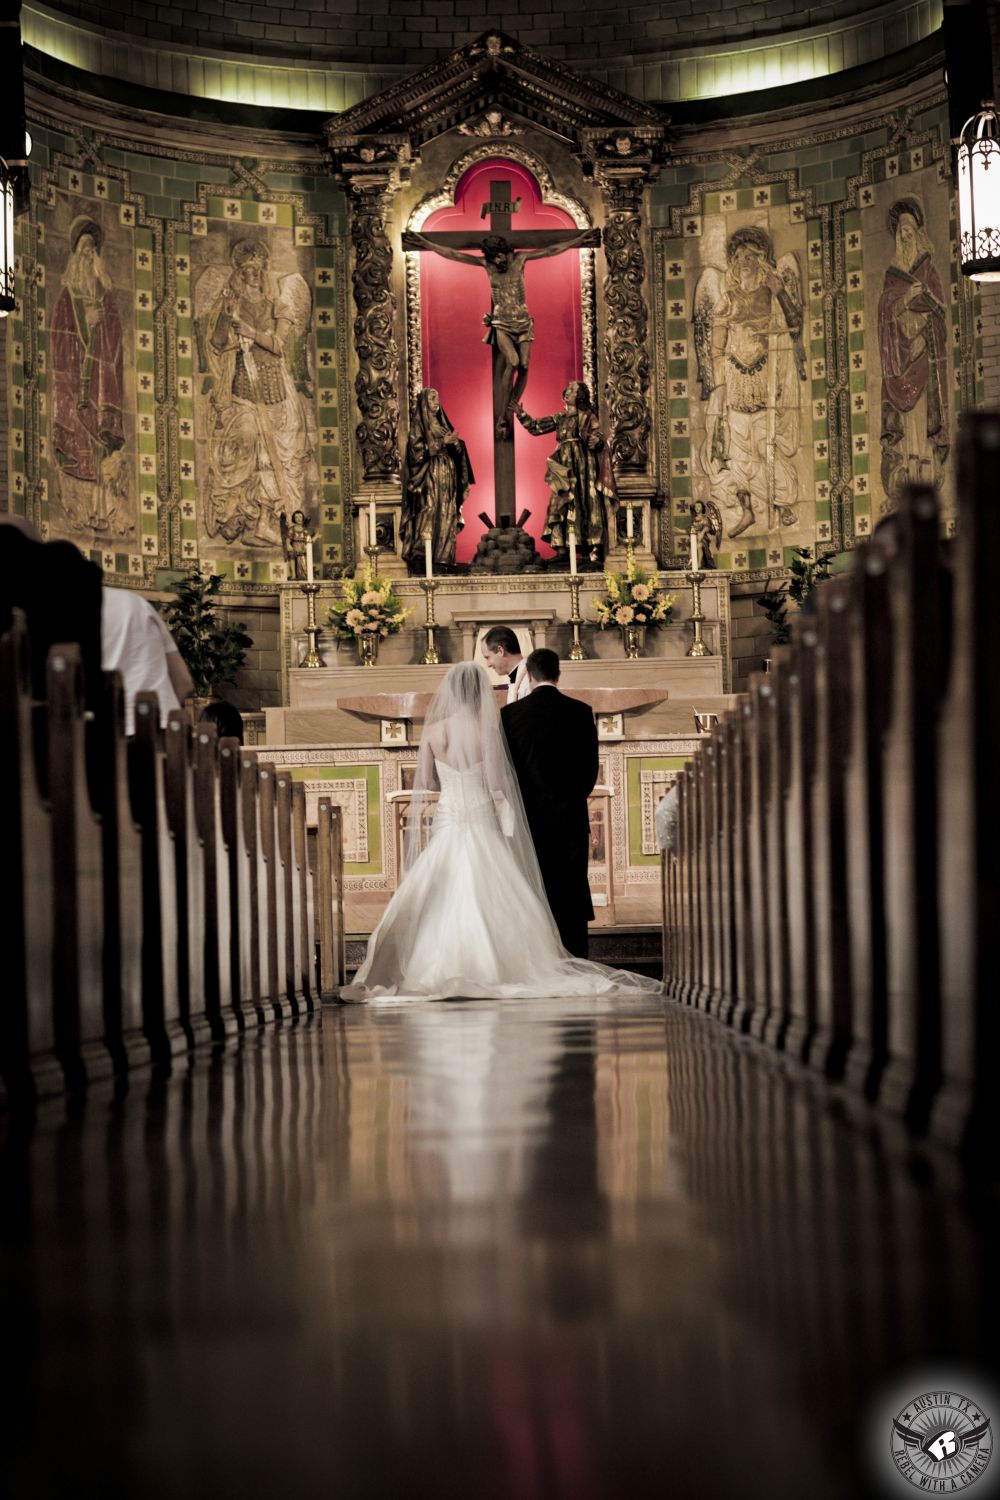 Dramatic image of bride and groom at the altar of cathedral during Catholic wedding ceremony taken by Austin wedding photographer.